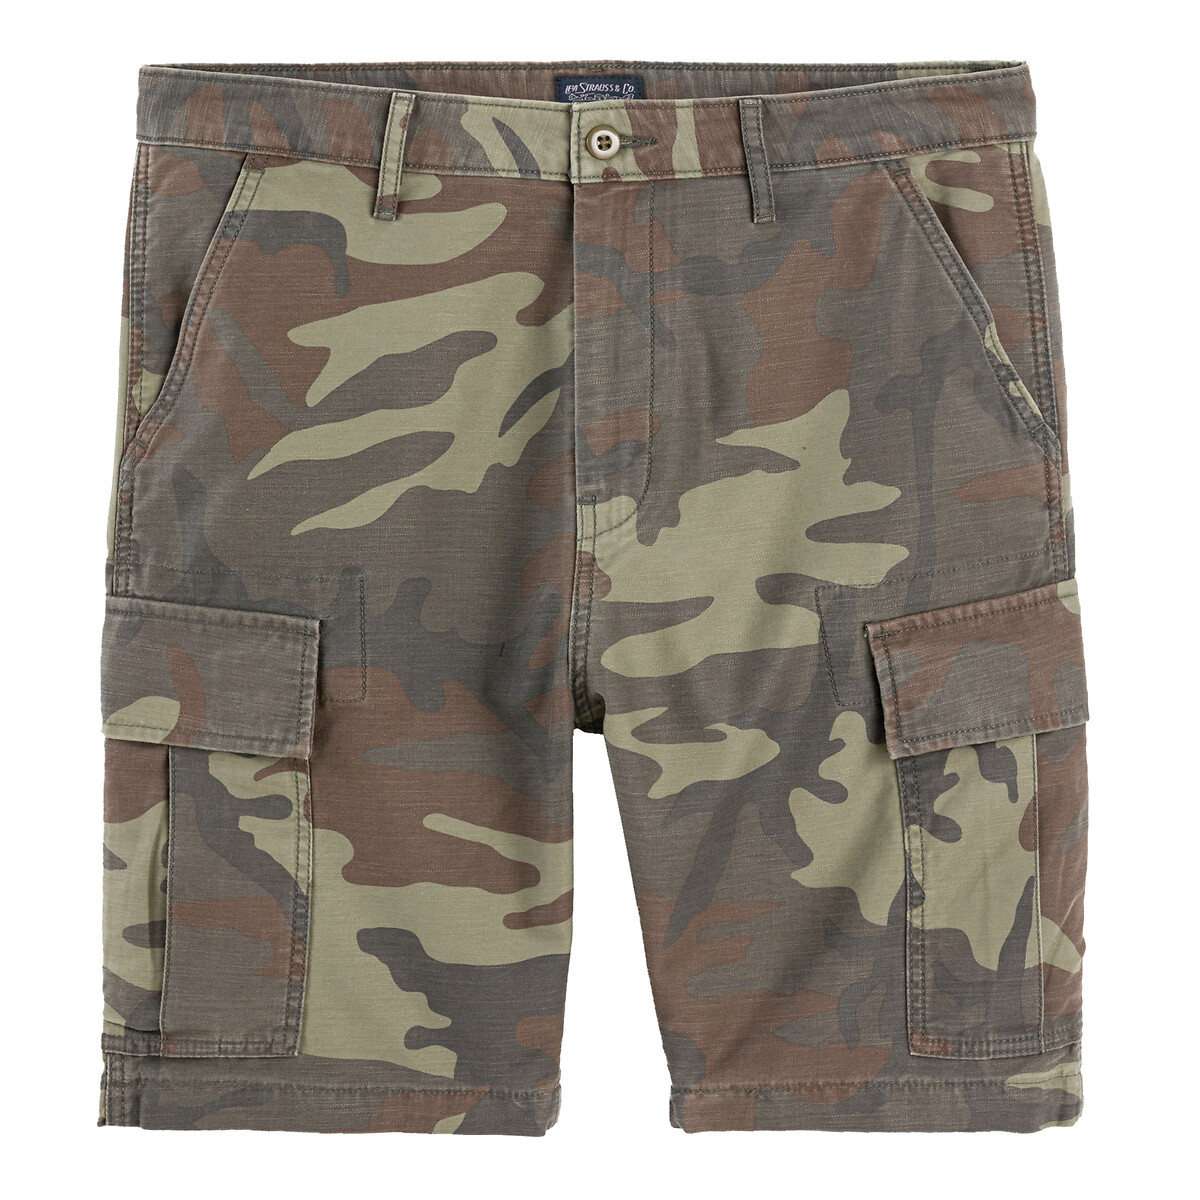 Image of Carrier Cotton Cargo Shorts in Camo Print